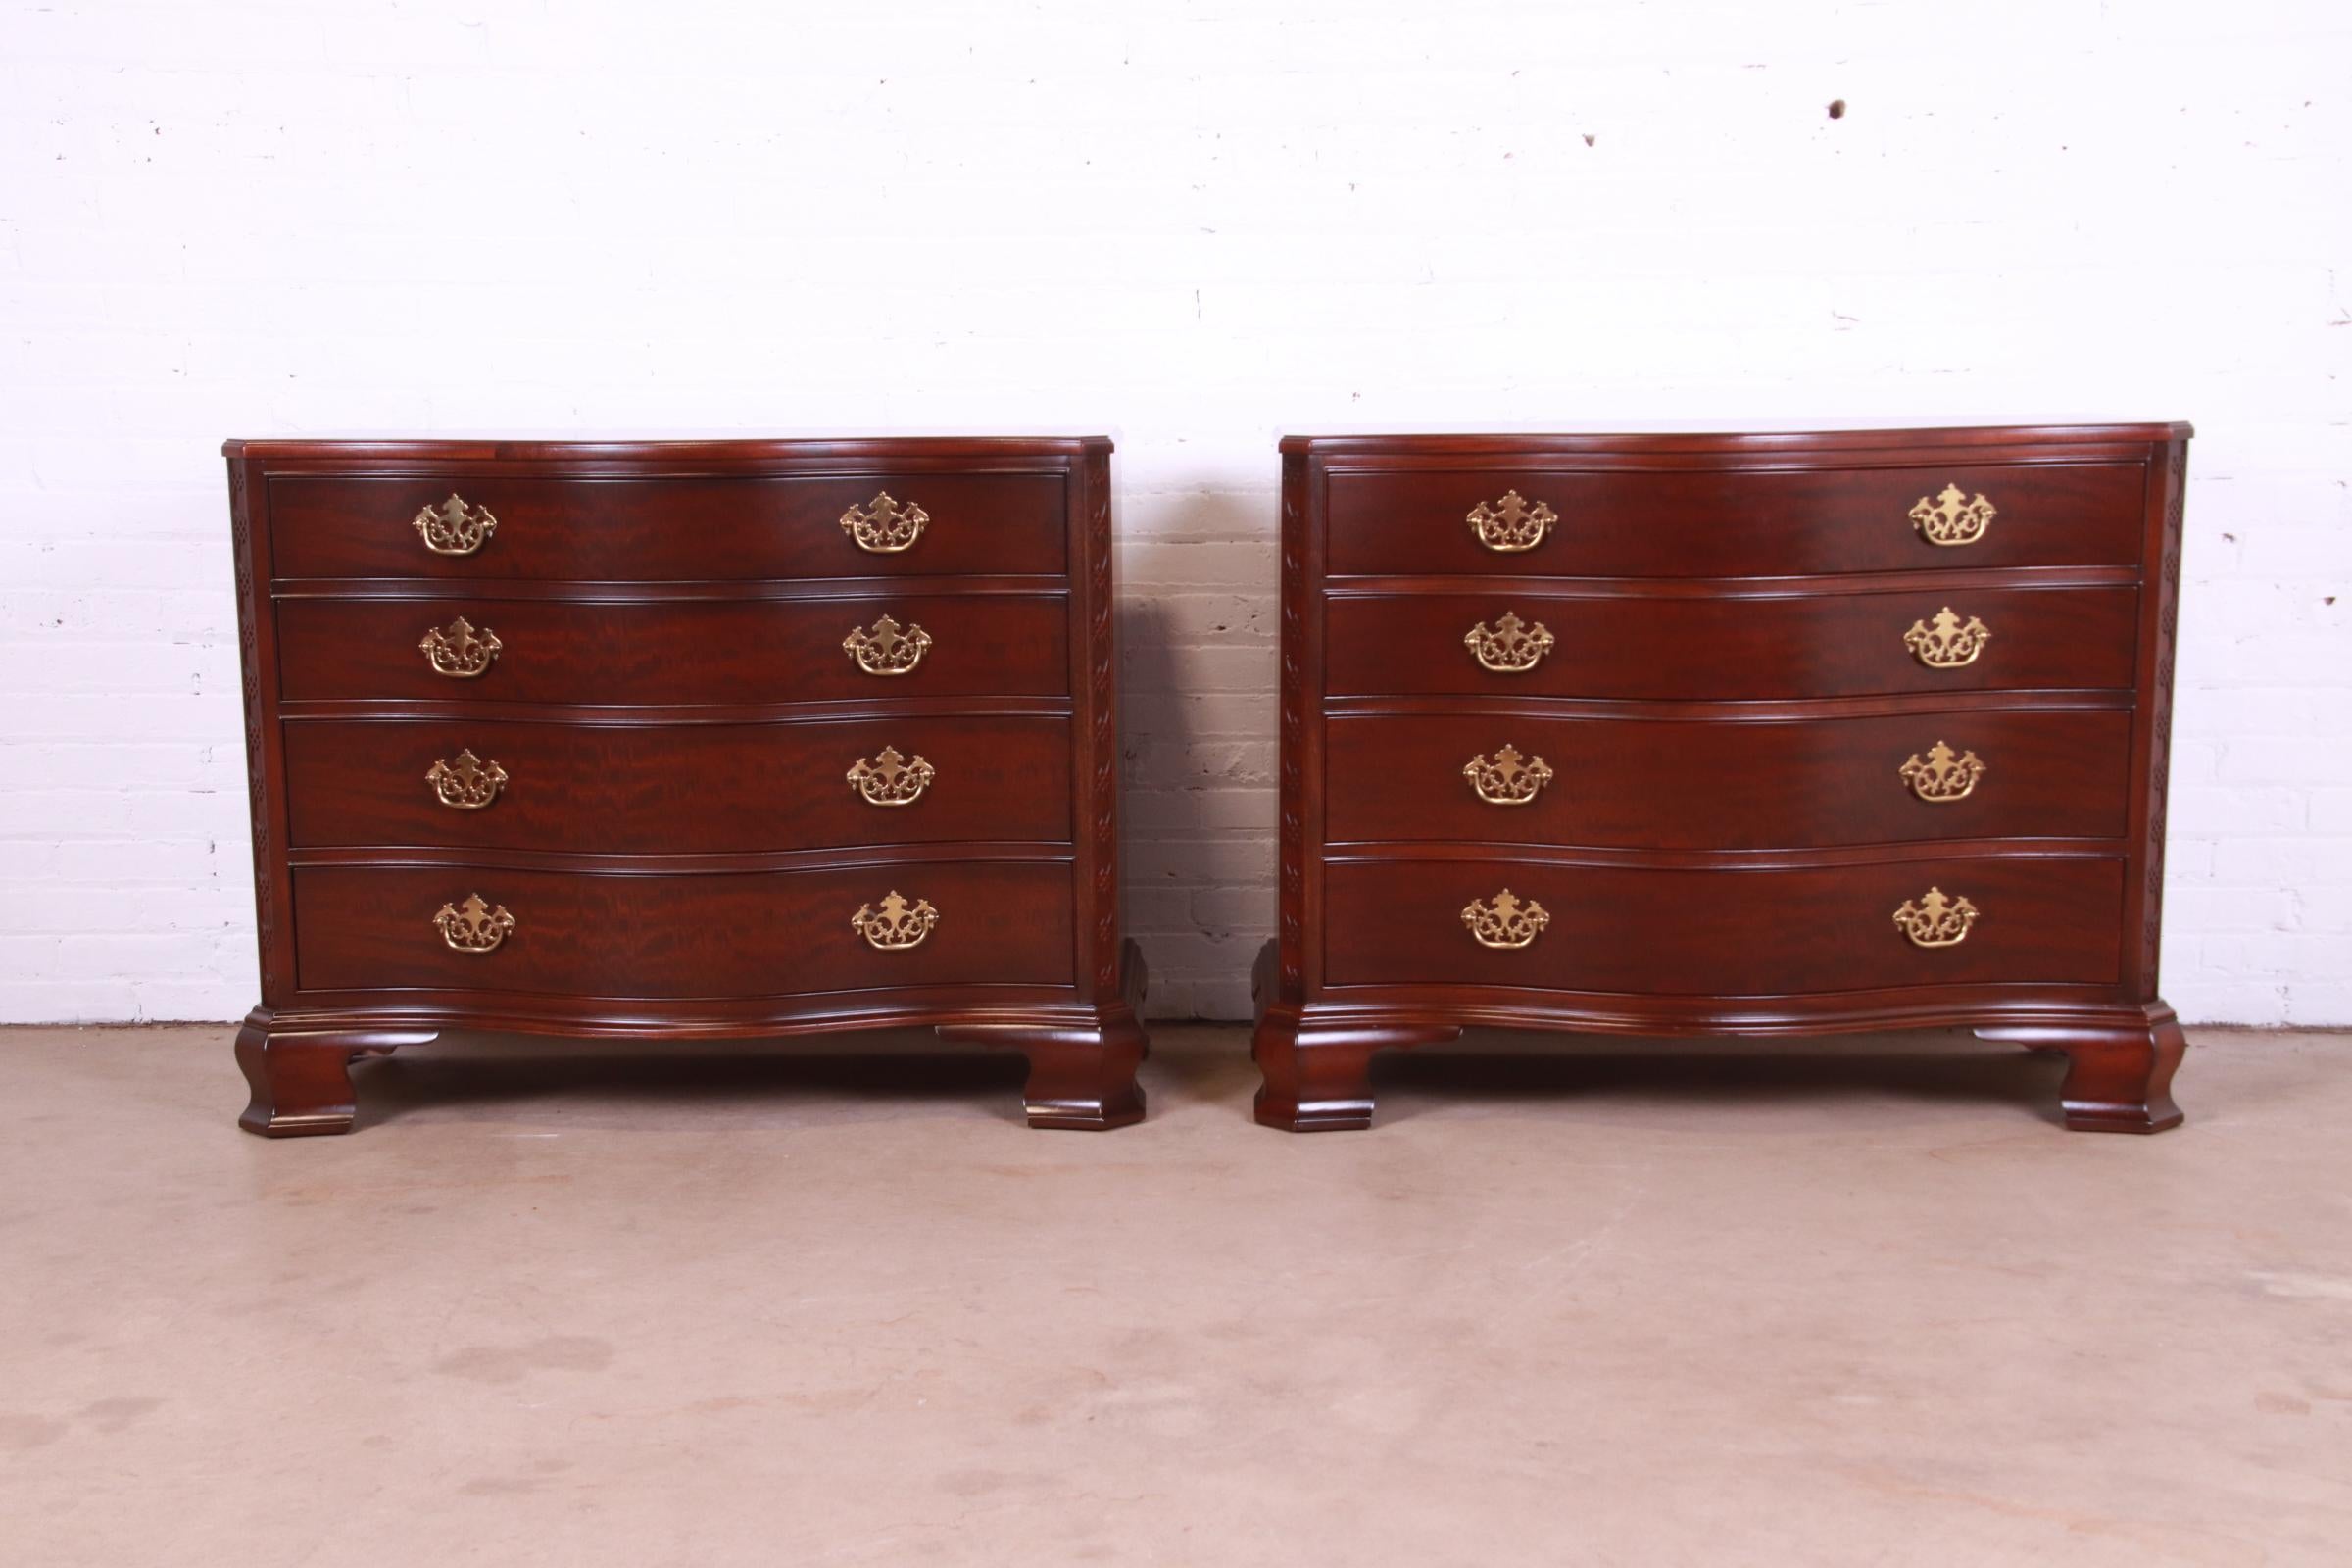 American Baker Furniture Chippendale Carved Mahogany Serpentine Dresser Chests, Pair For Sale